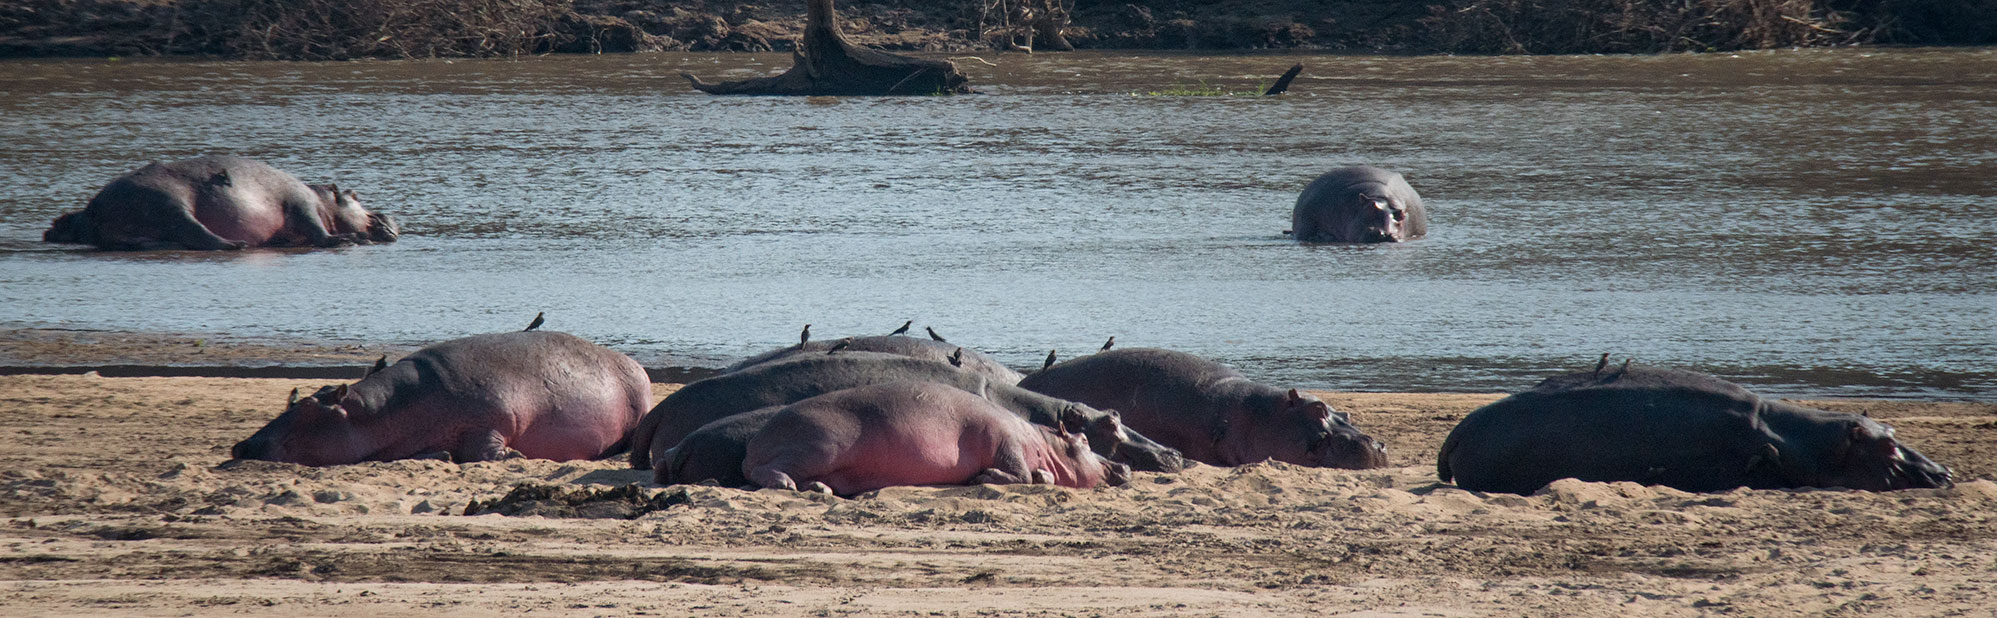 Hippos nap on the river beach of the Luangwa